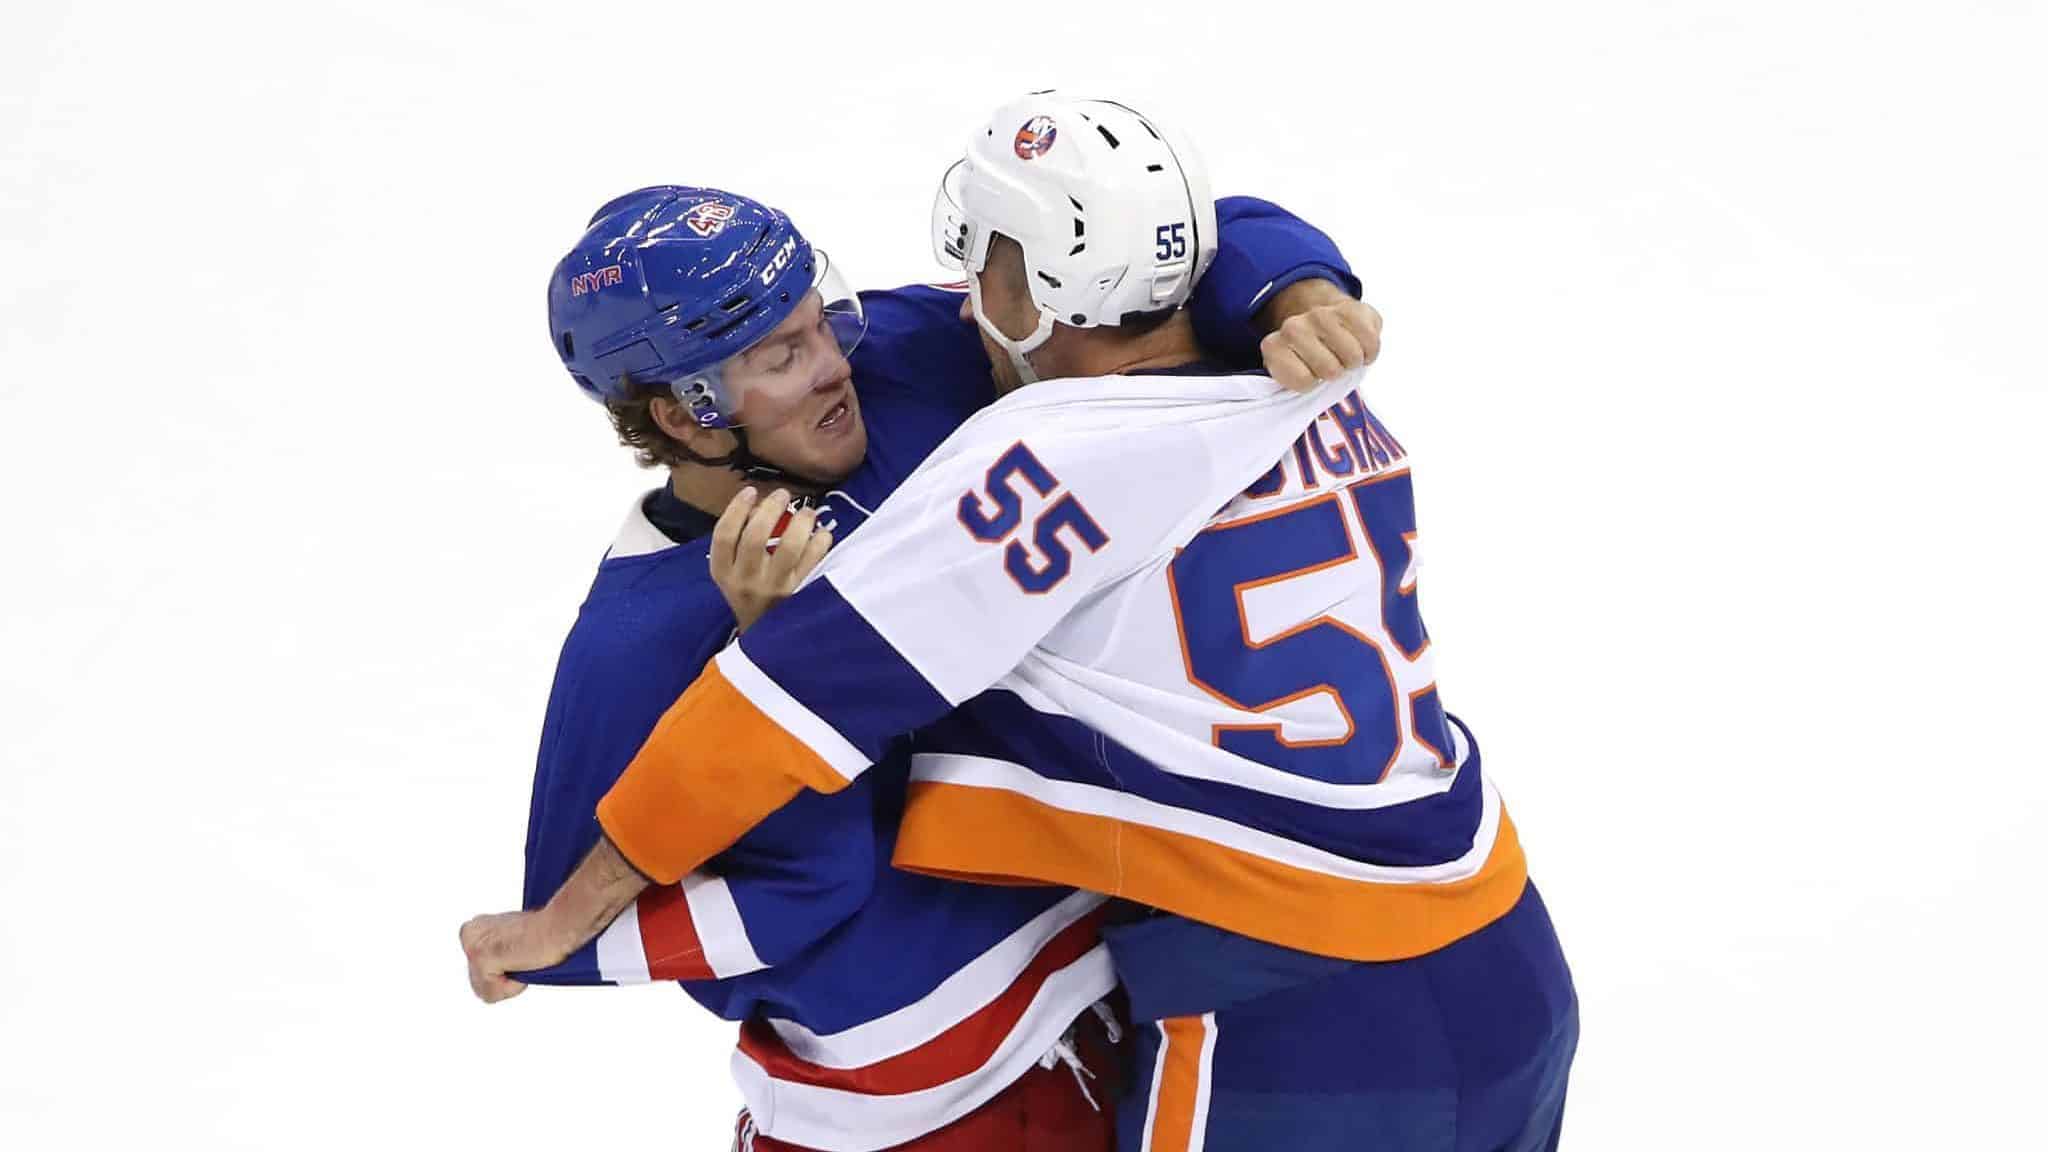 TORONTO, ONTARIO - JULY 29: Brendan Lemieux #48 of the New York Rangers and Johnny Boychuk #55 of the New York Islanders scuffle in the first period during an exhibition game prior to the 2020 NHL Stanley Cup Playoffs at Scotiabank Arena on July 29, 2020 in Toronto, Ontario.